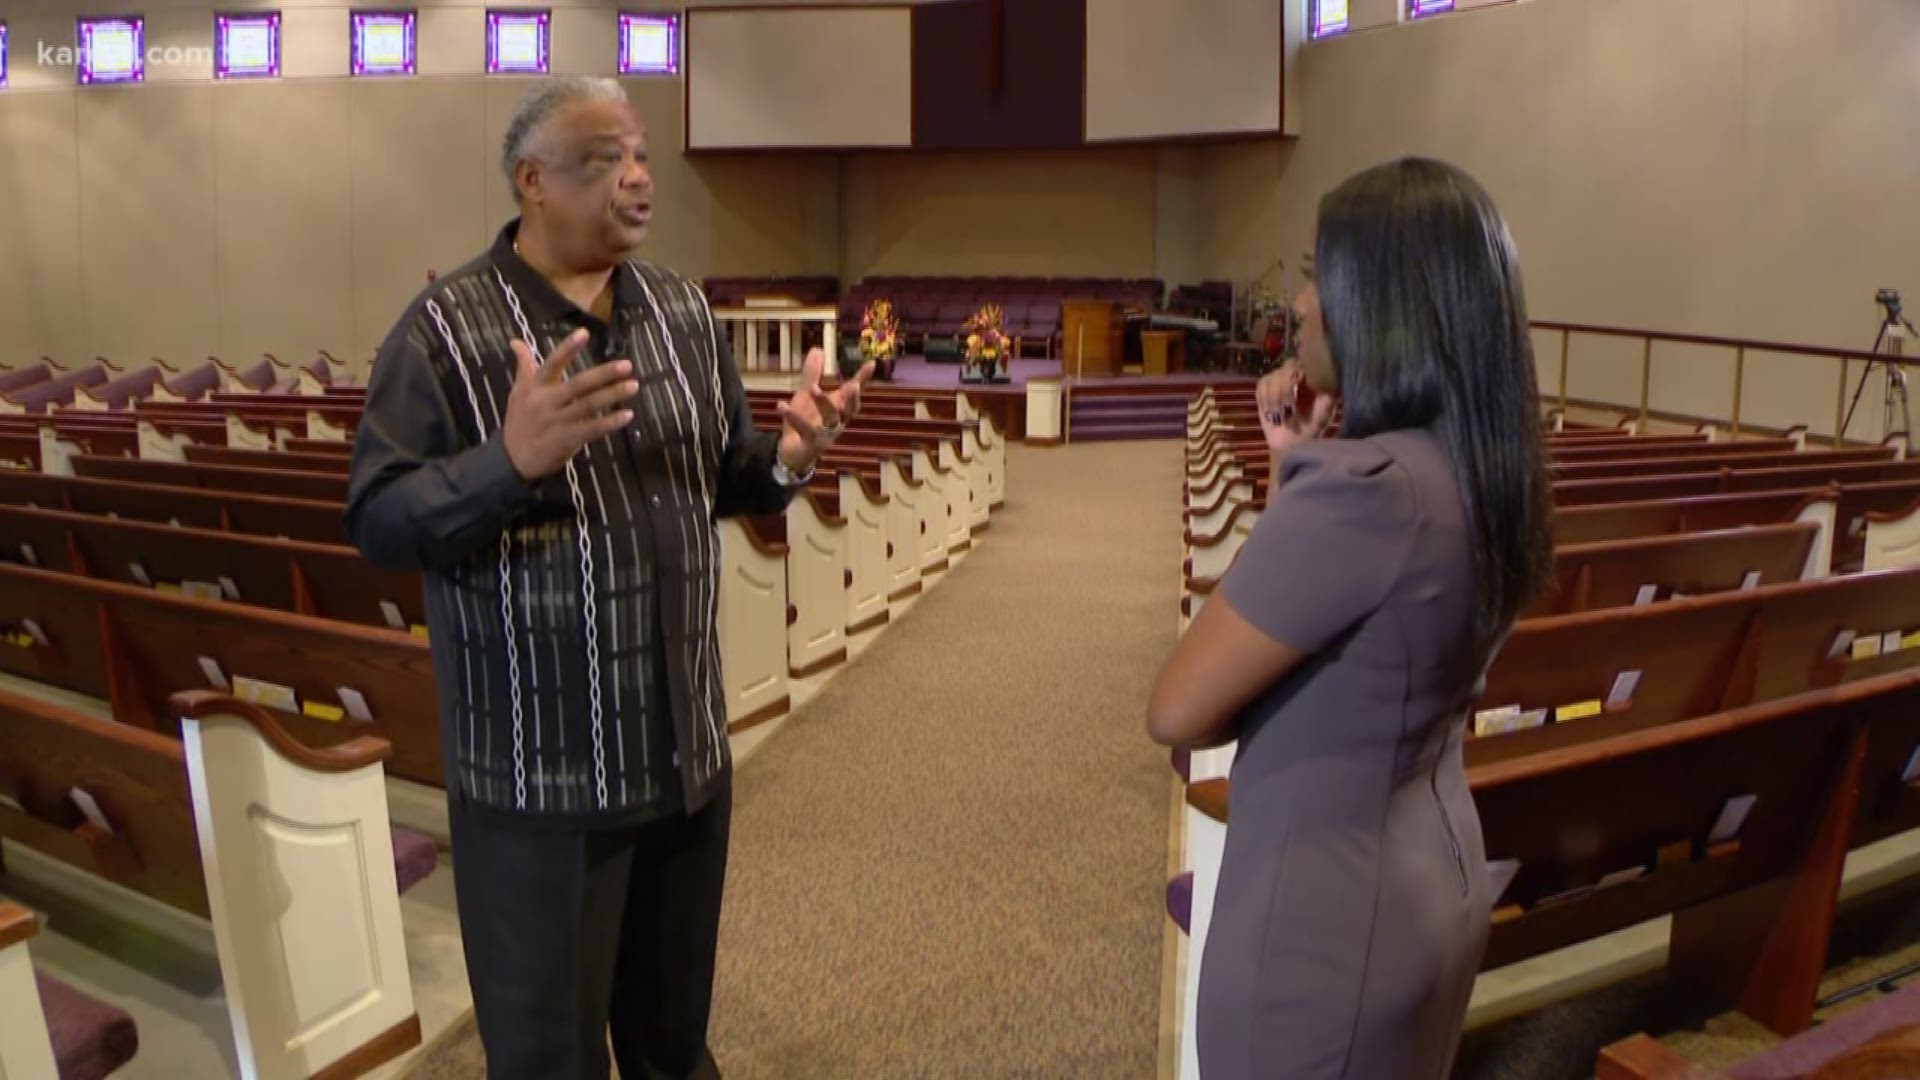 Around the country, places where people worship have been targeted. In the Twin Cities, local leaders of faith are responding with courage. https://kare11.tv/2GJzTJ5